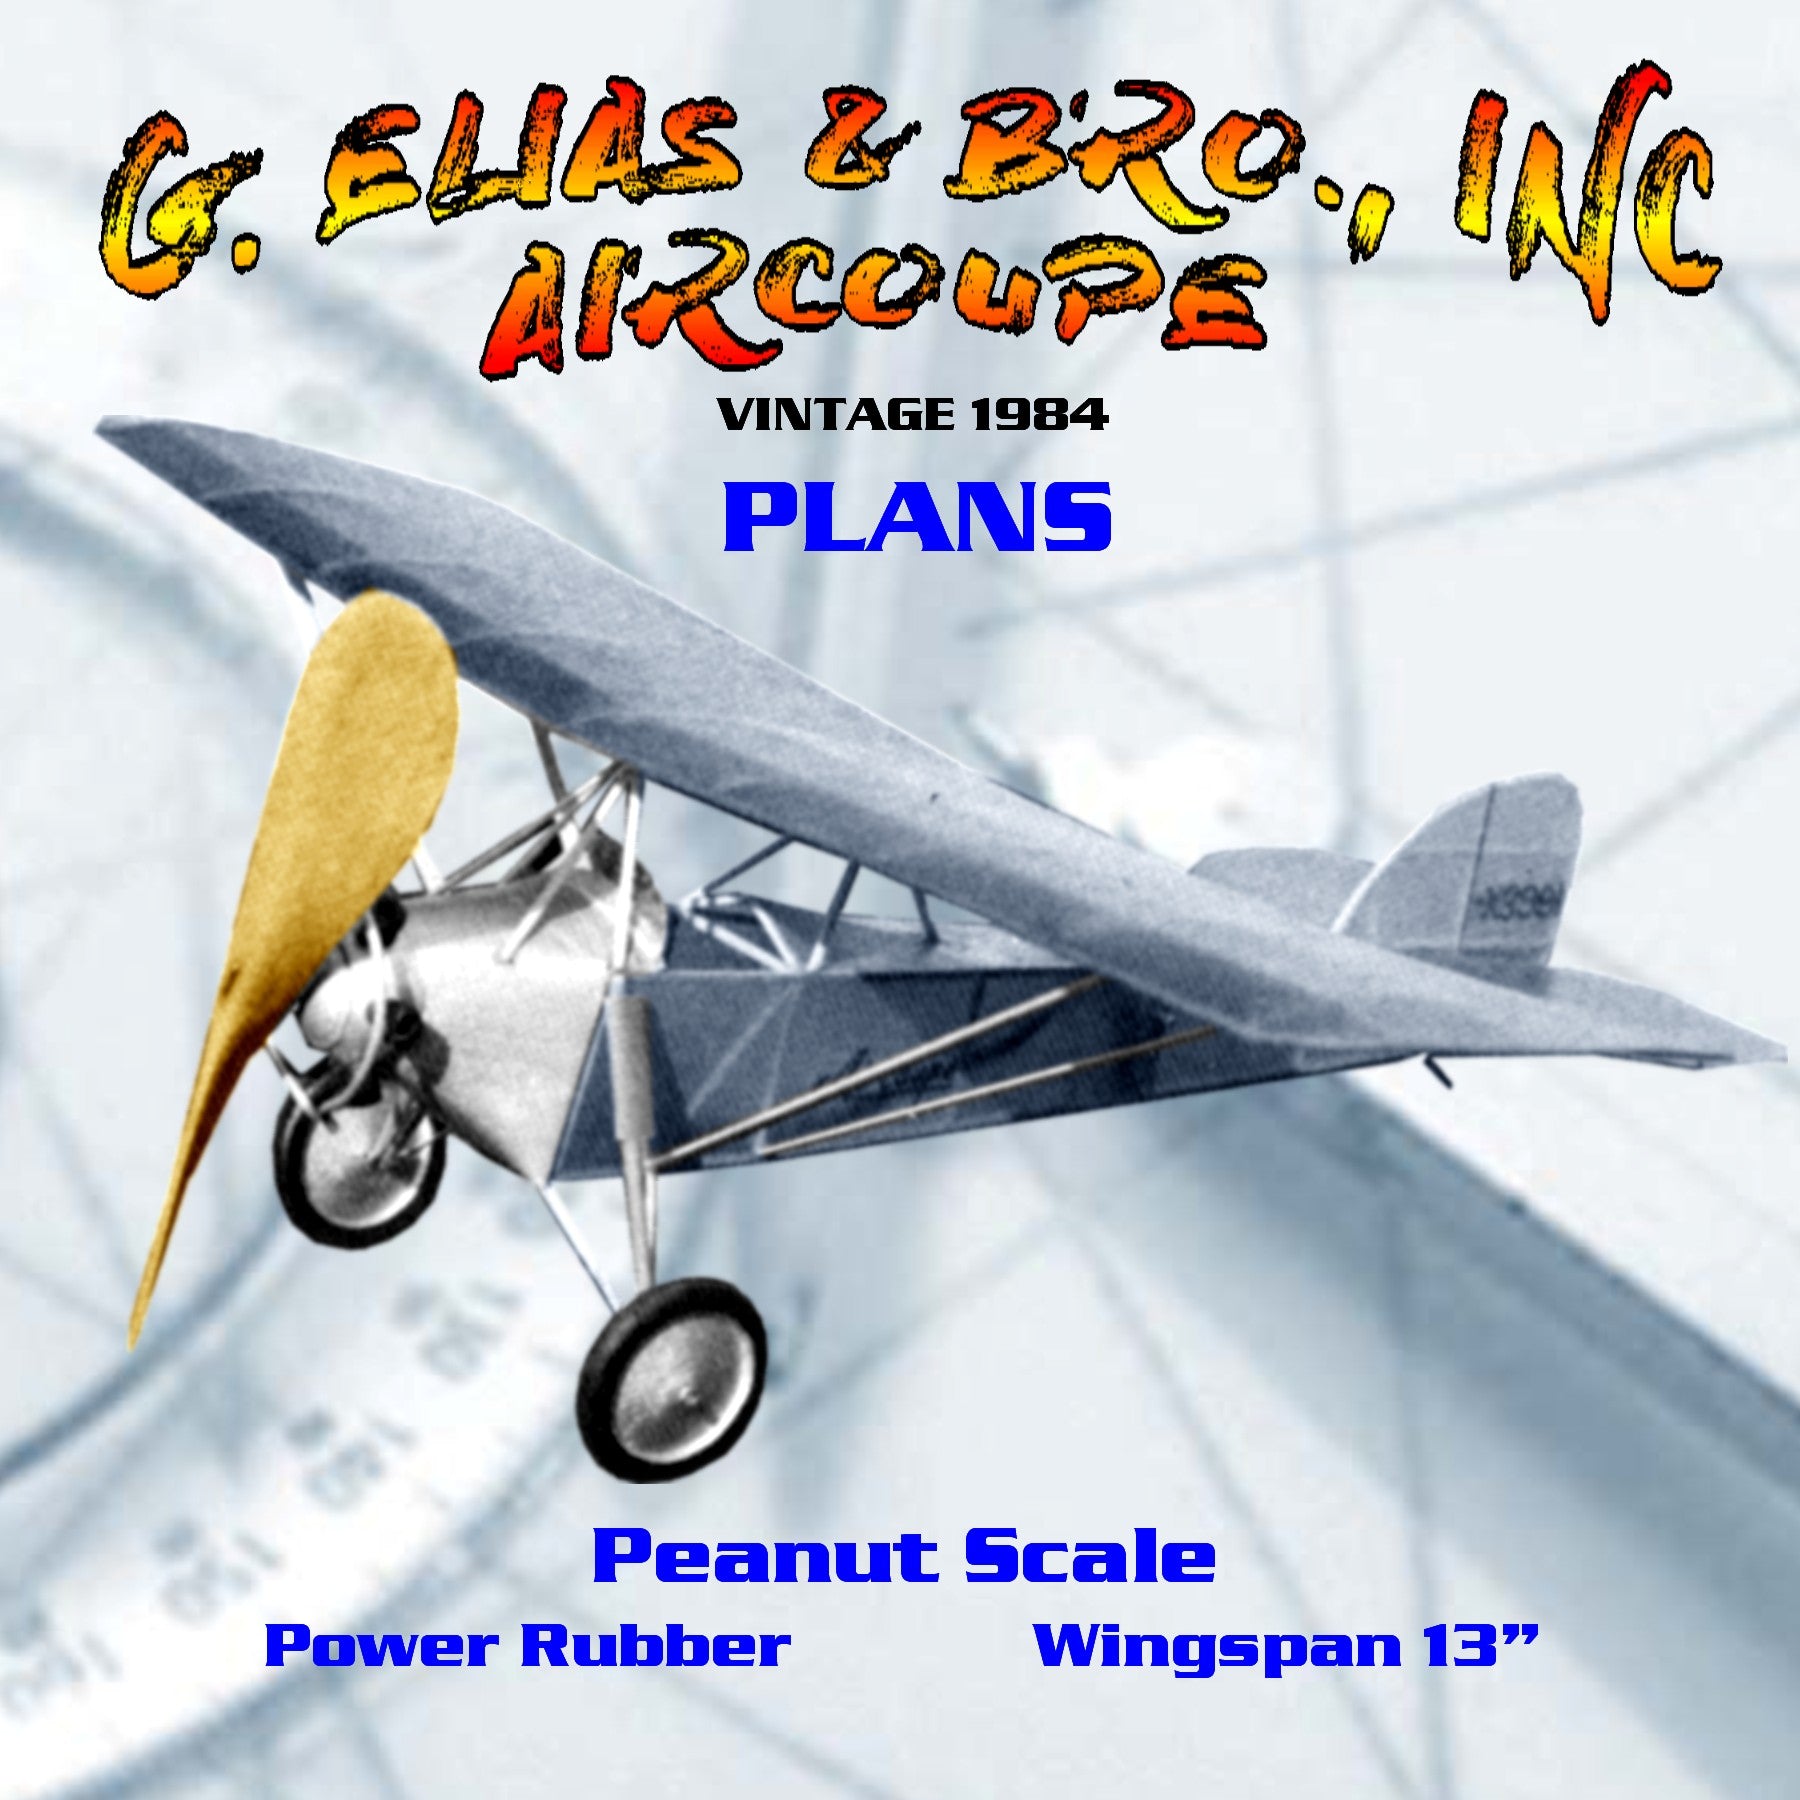 full size printed plans vintage 1984 peanut scale "g. elias & bro., inc aircoupe" one-minute duration